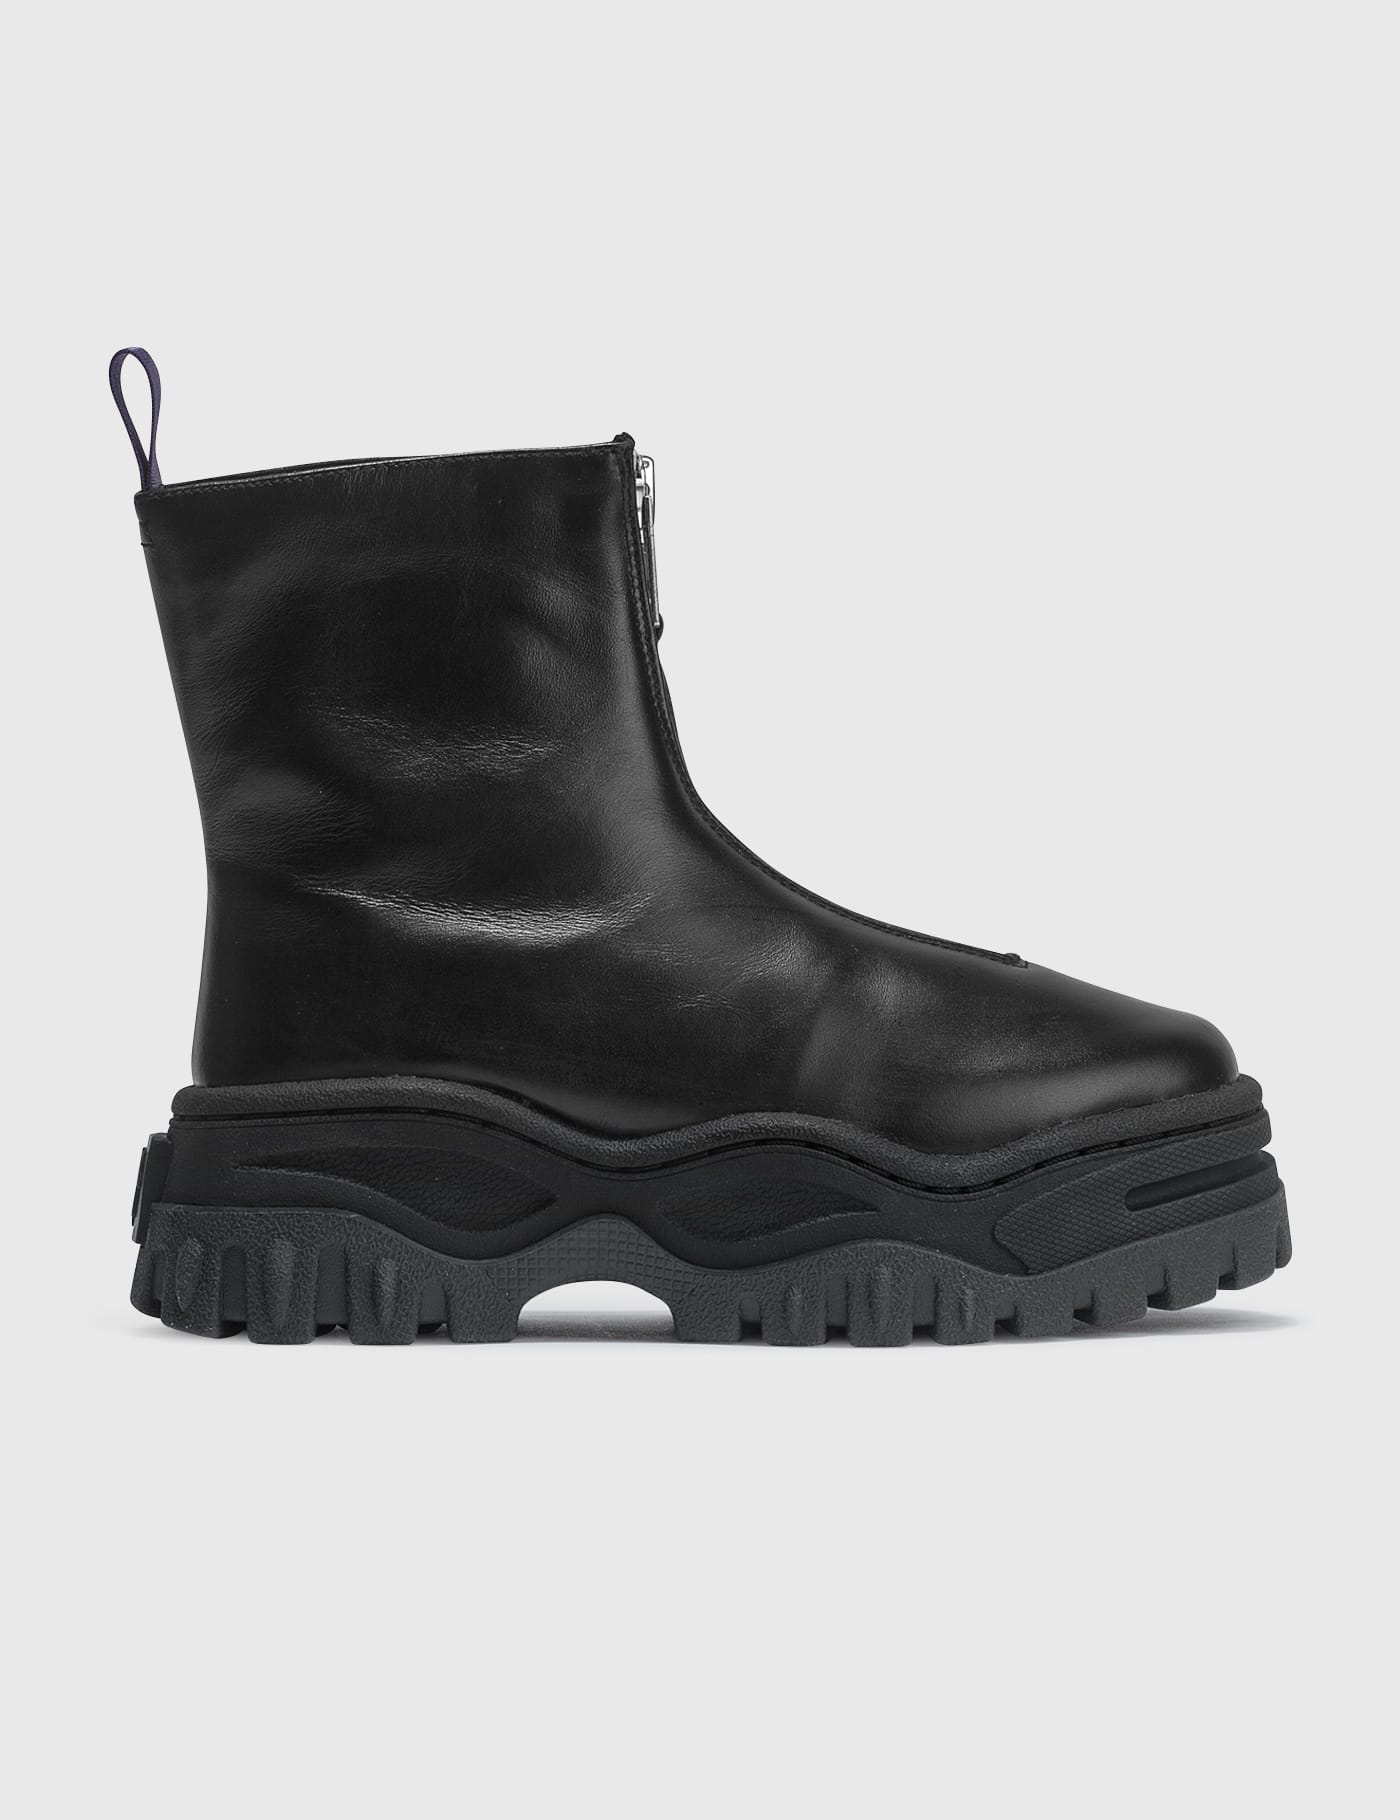 Eytys - Raven Zip Up Boots | HBX - Globally Curated Fashion and Lifestyle  by Hypebeast